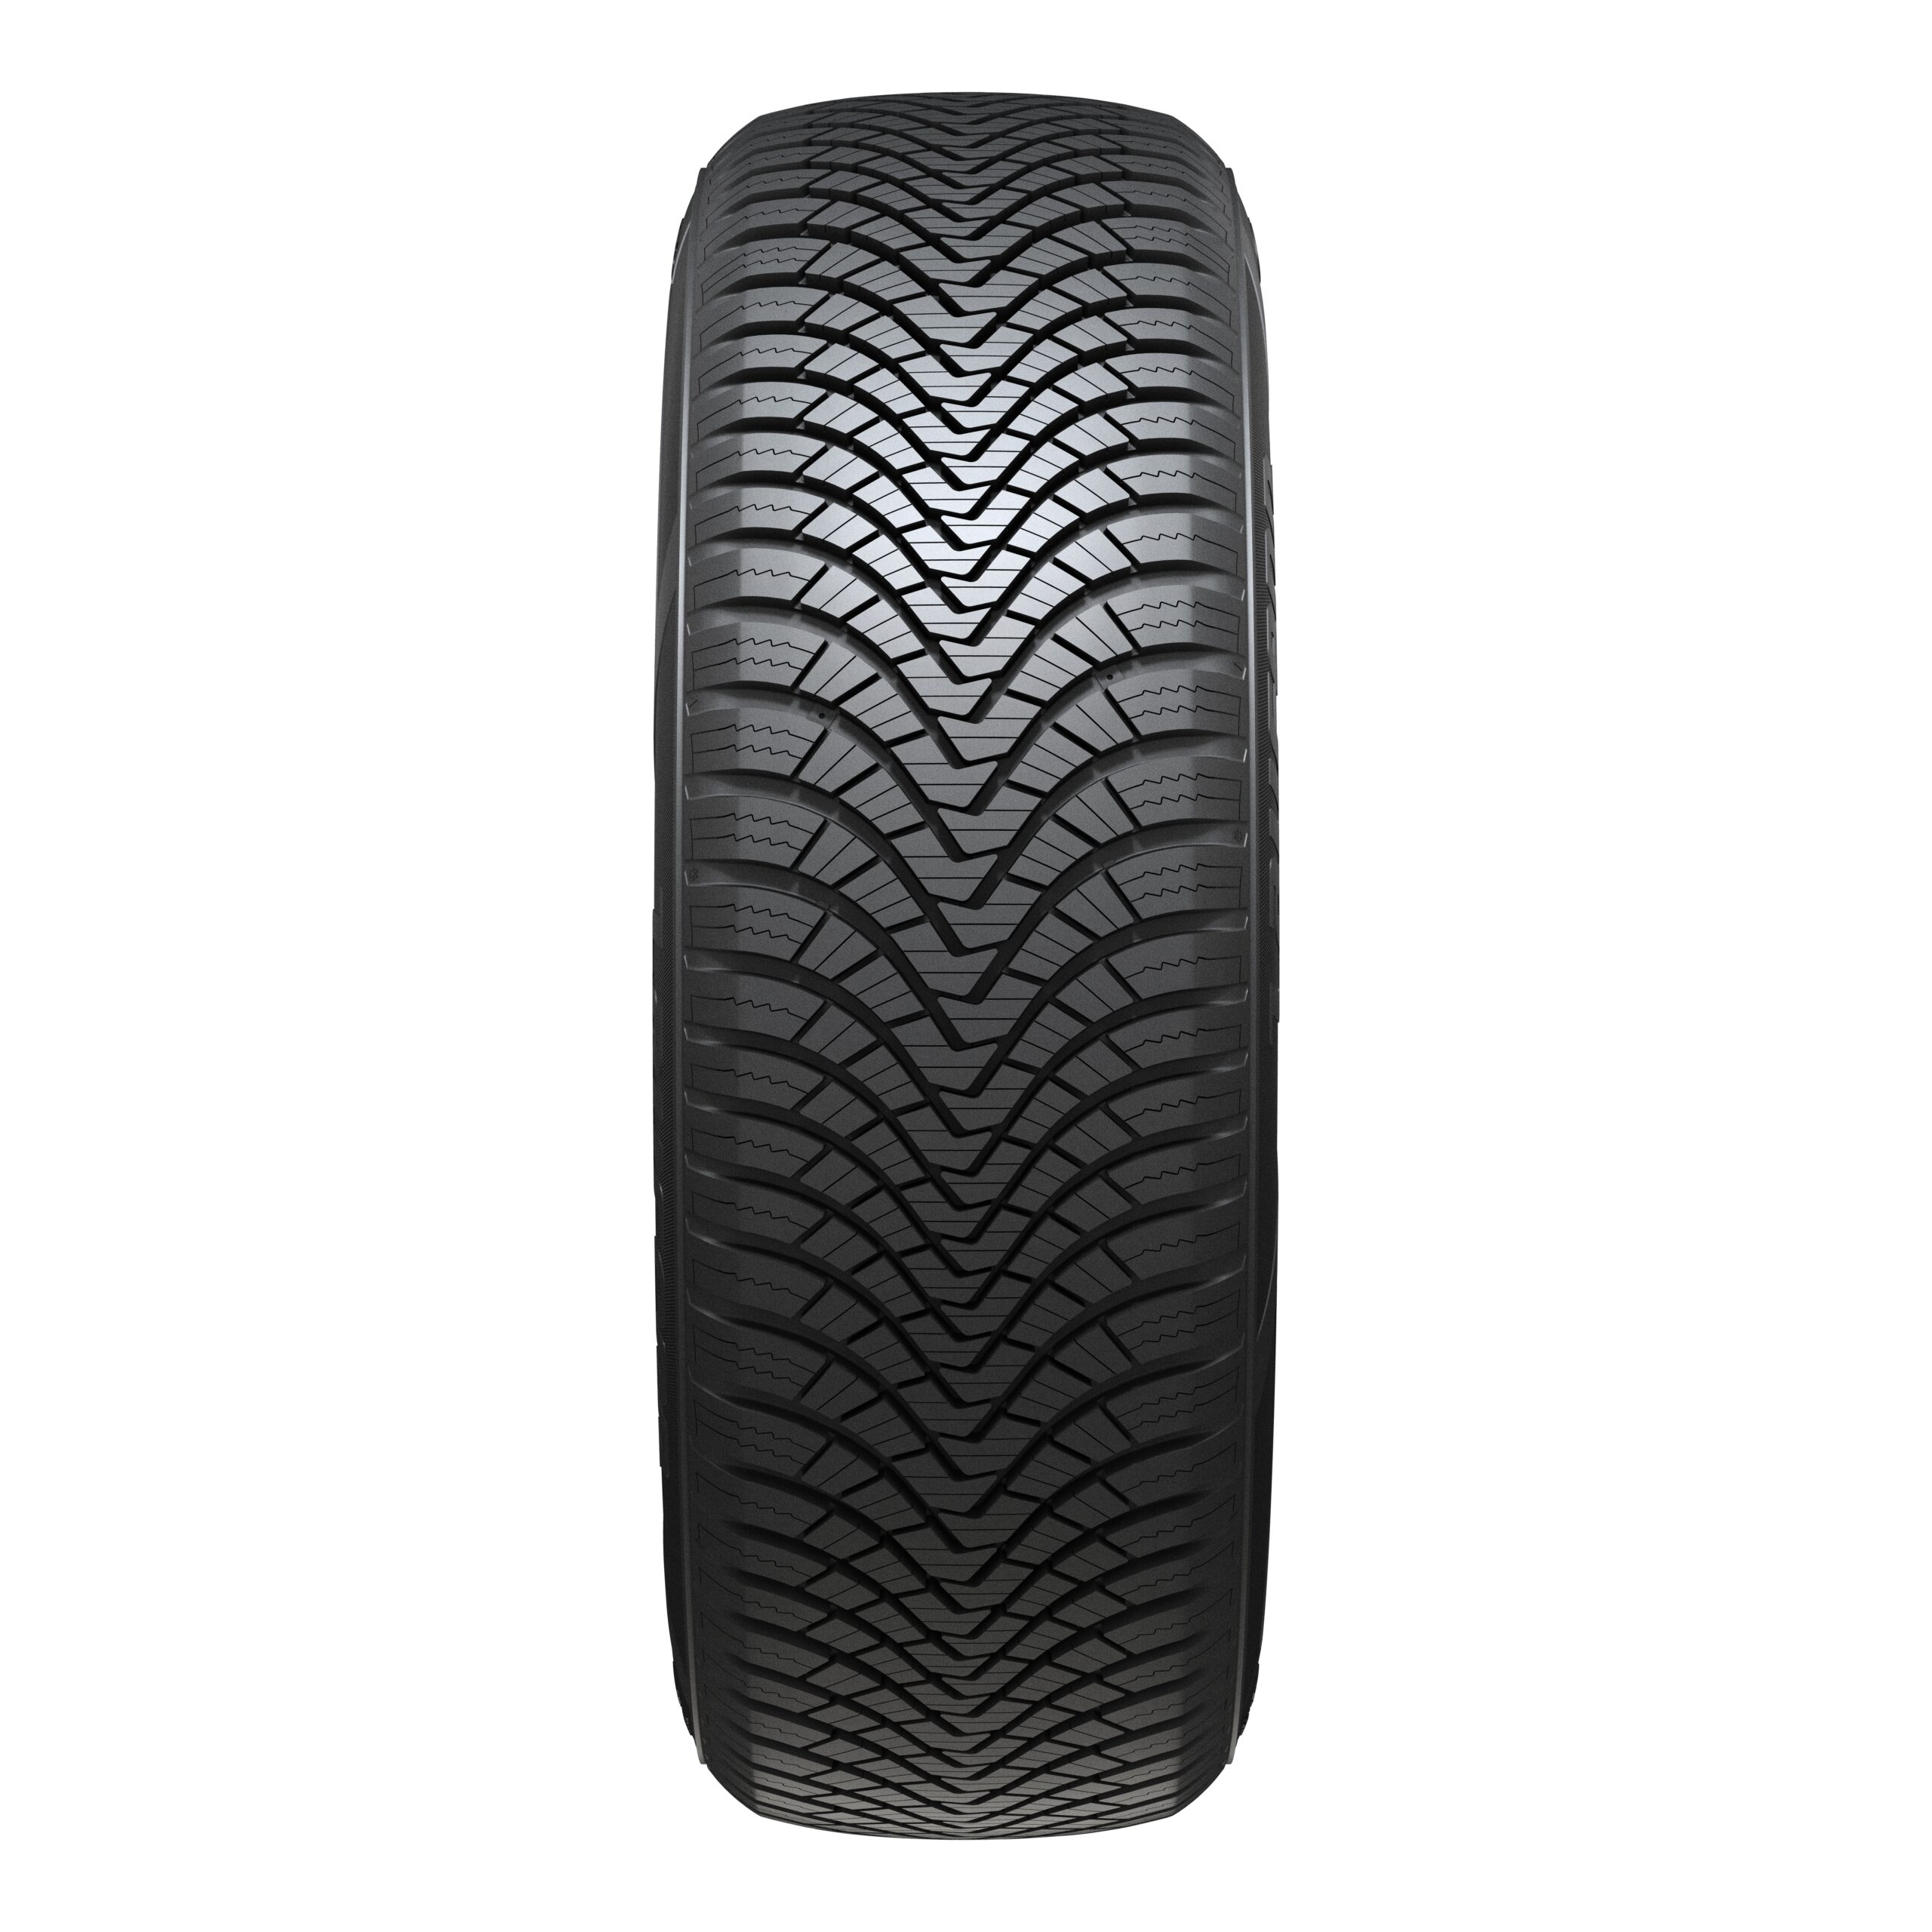 Laufenn G Fit comparison tyre What 4s | Lh71 Independent | Tyre